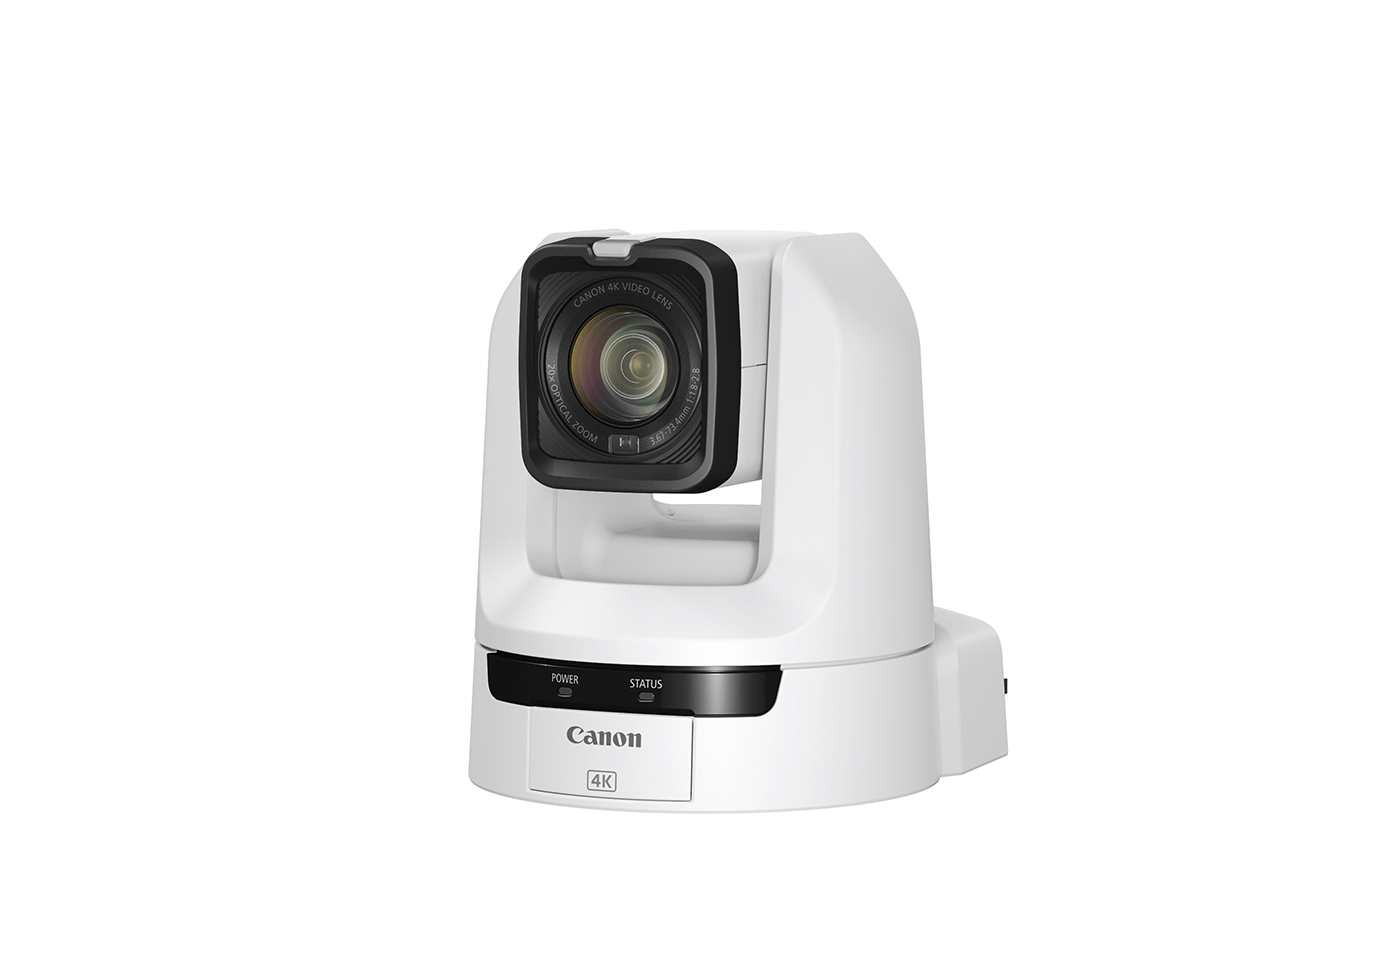 Product image of CR-N300 Remote camera in black